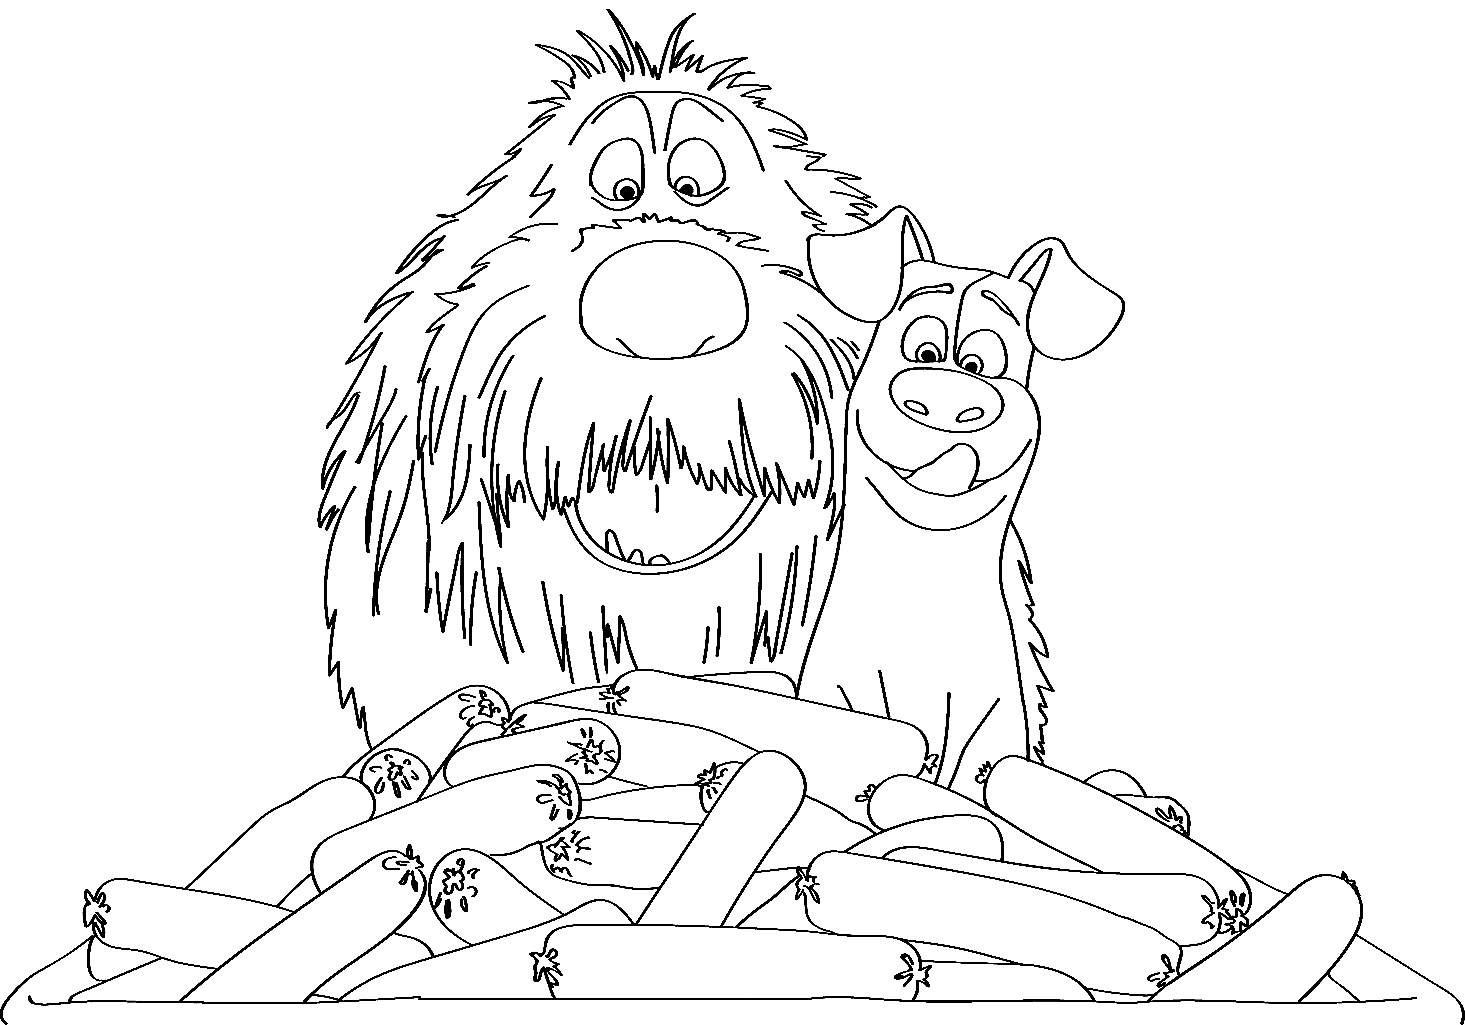 Duke and Max Coloring Pages